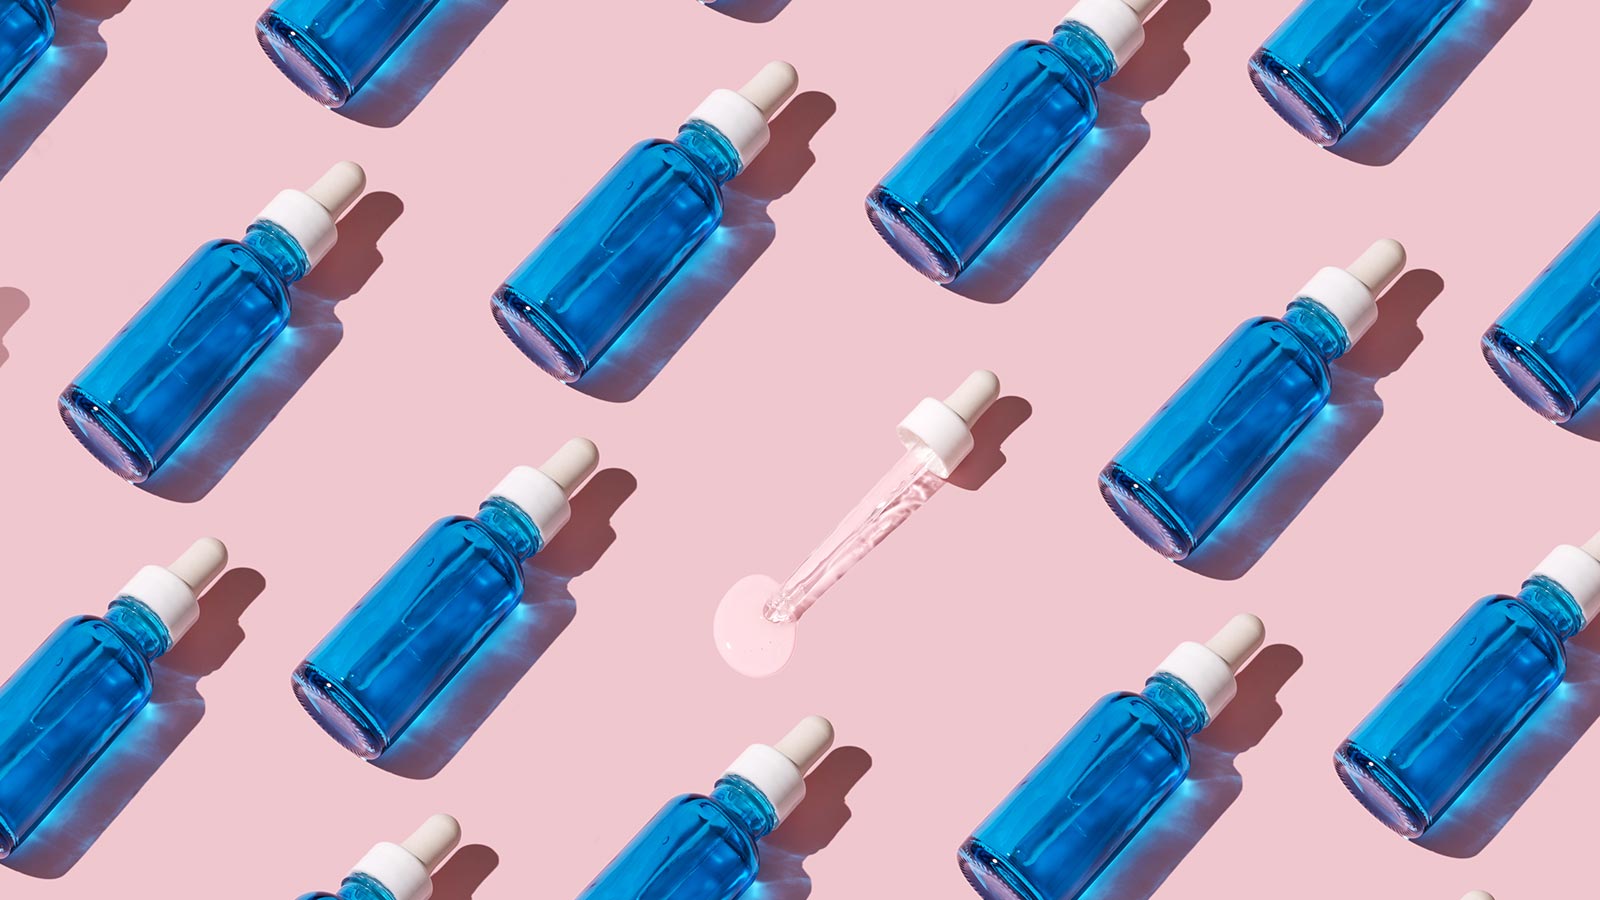 B Hyaluronic Acid Spritz Review : 9 Best Facial Mists The Independent The Independent : Hyaluronic acid, also called hyaluronan, is an anionic, nonsulfated glycosaminoglycan distributed widely throughout connective, epithelial, and neural tissues.